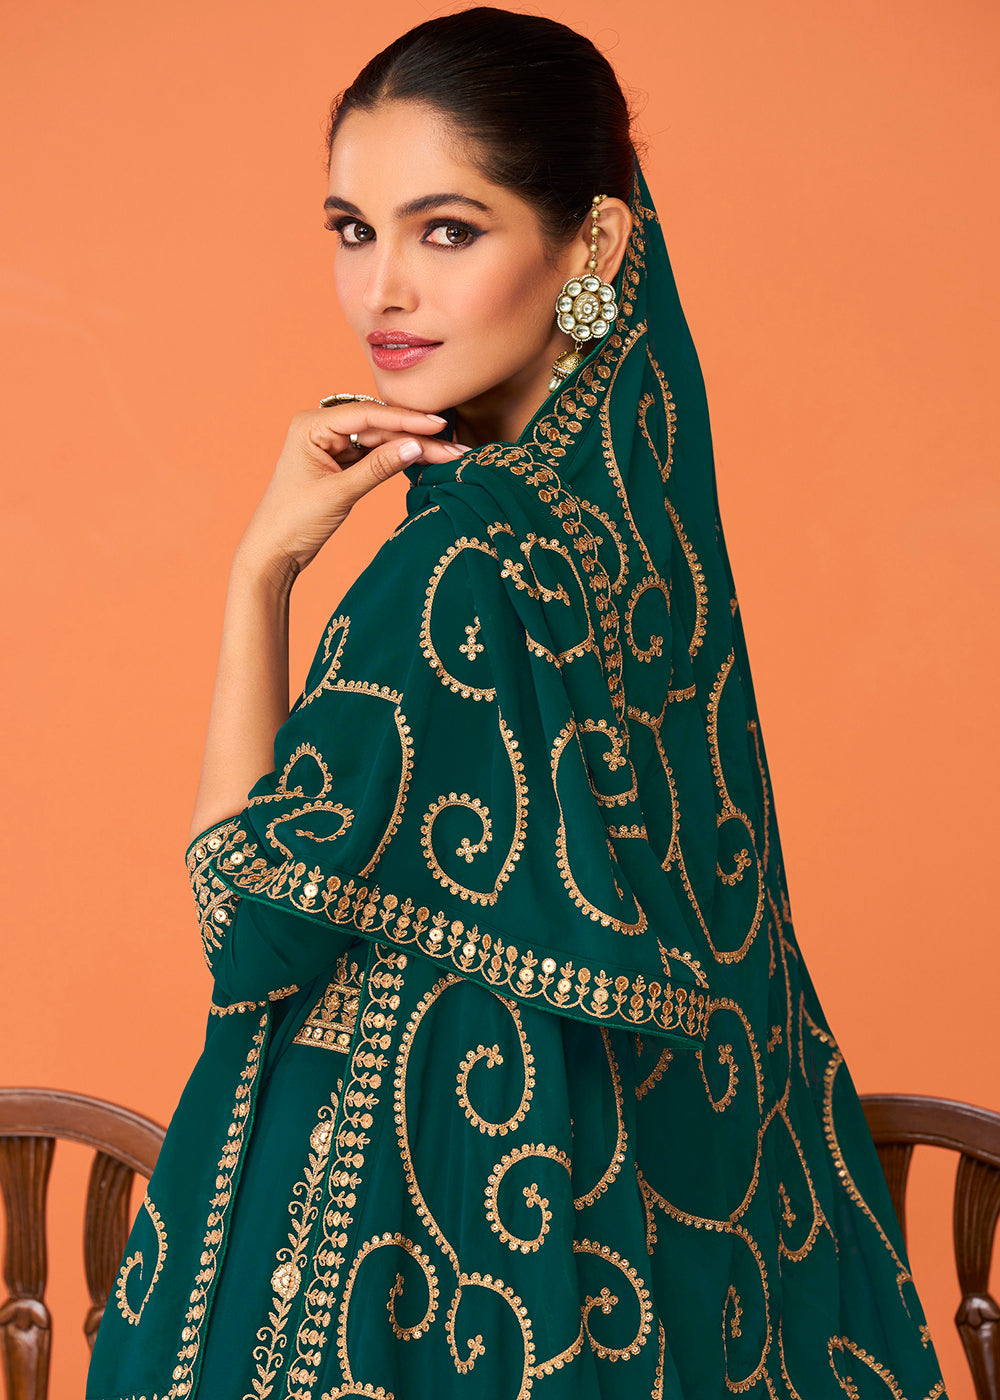 Buy Now Teal Green Festive Wear Embroidered Anarkali Suit Online in USA, UK, Australia, New Zealand, Canada & Worldwide at Empress Clothing. 